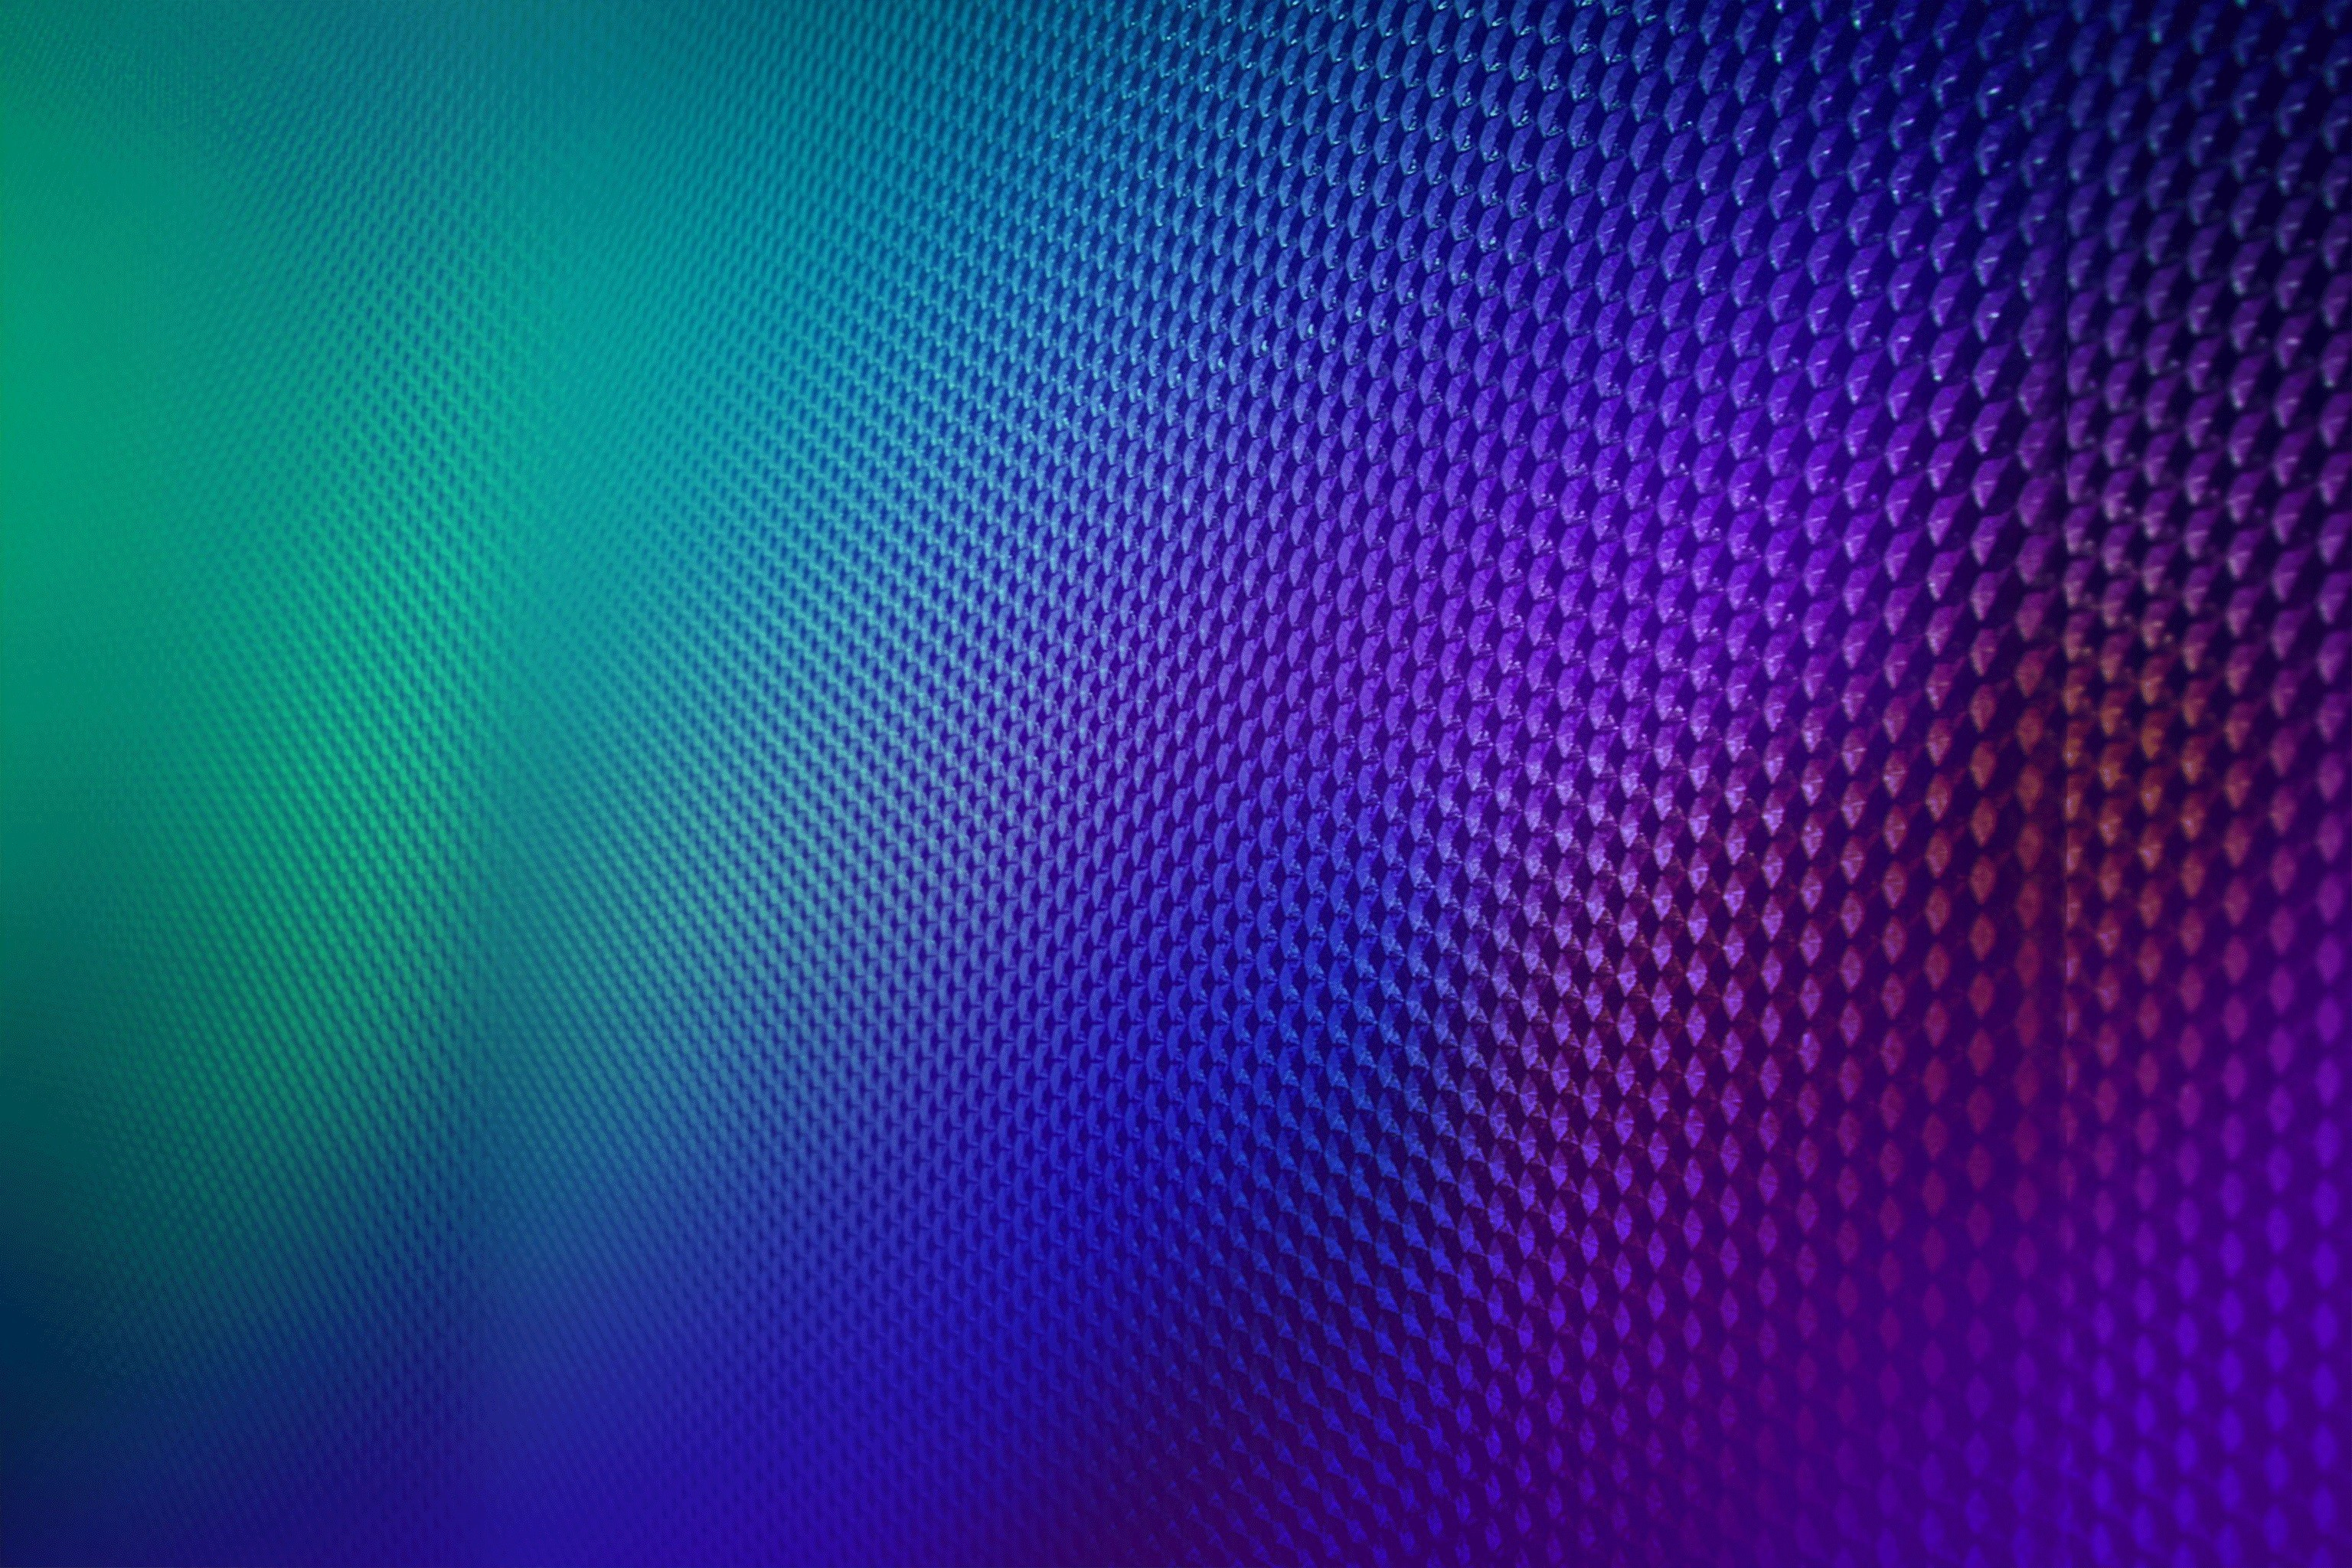 3072x2048 Samsung Galaxy Note 4 Stock Wallpapers 04 [3072 x 2048